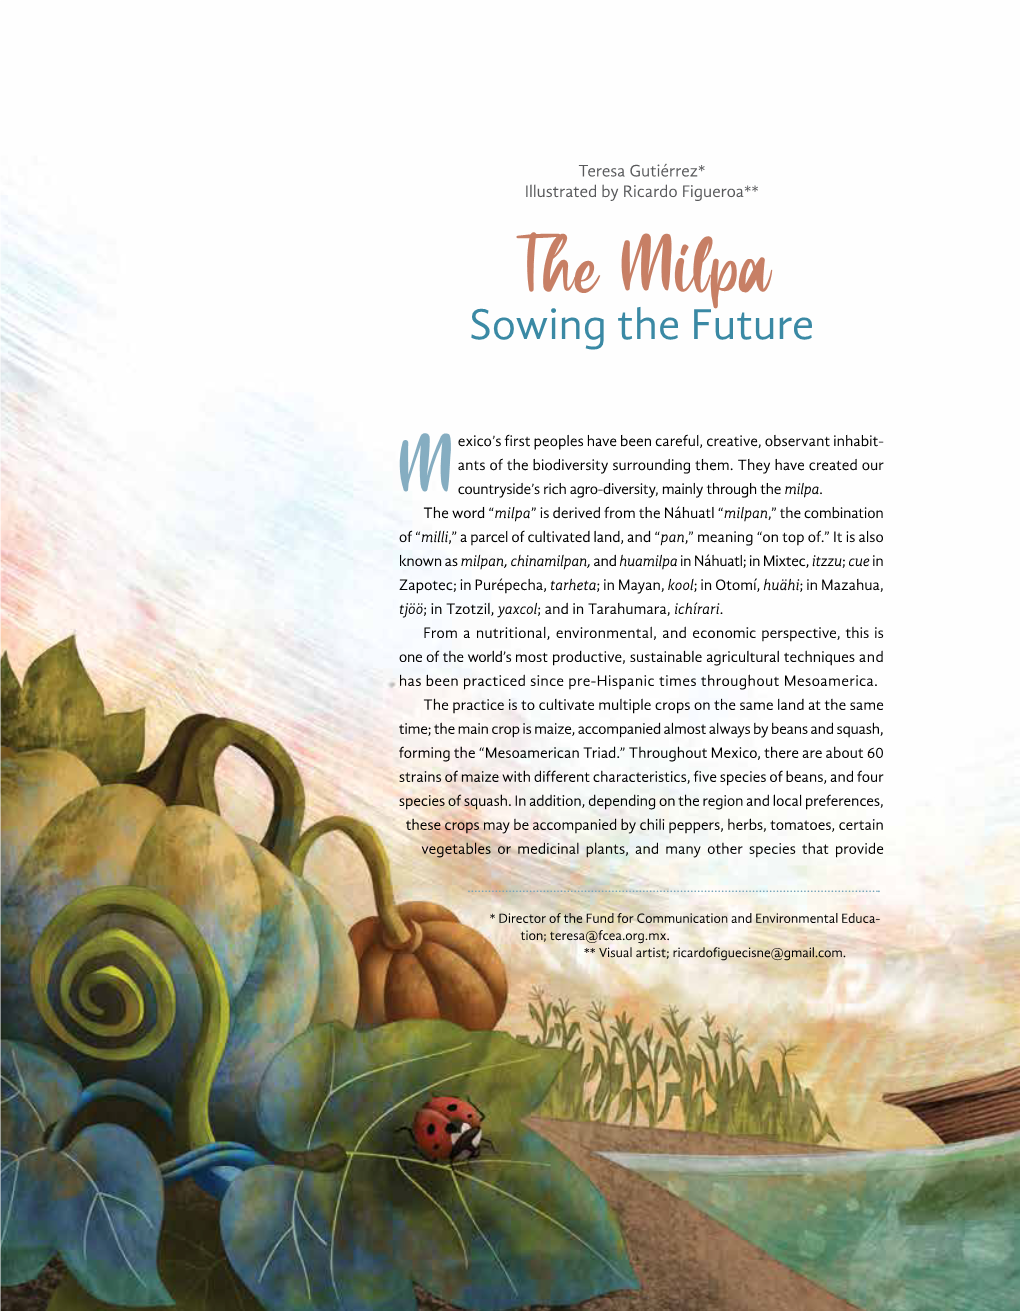 The Milpa Sowing the Future